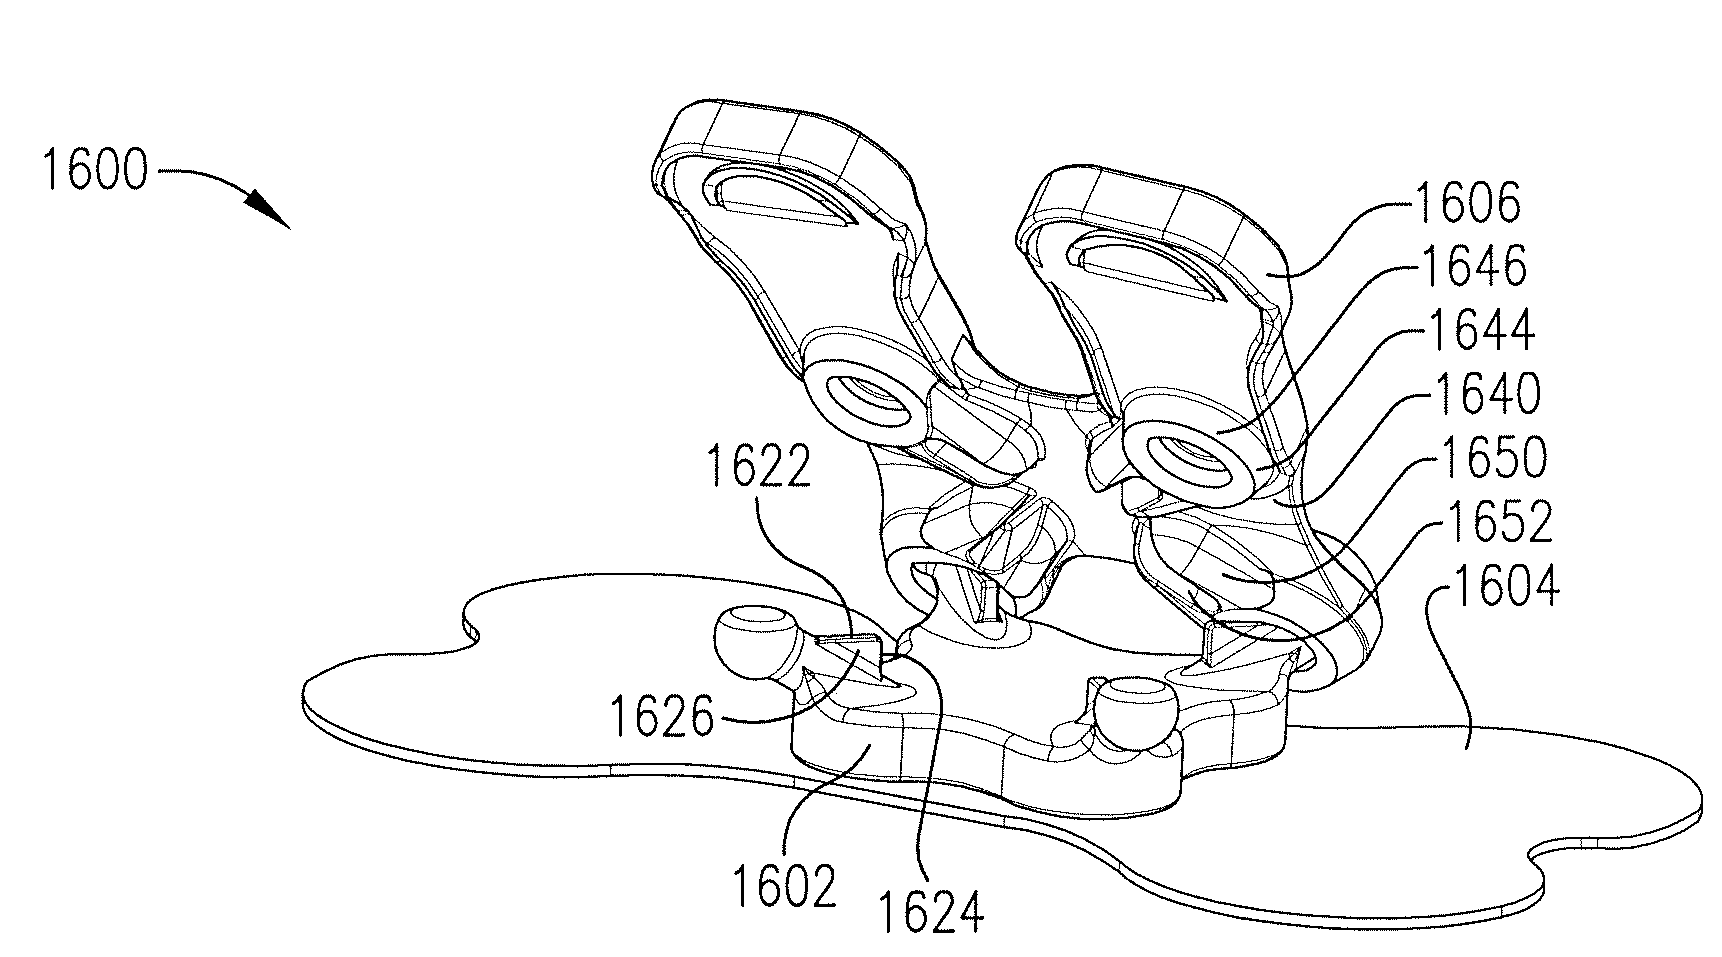 Intravenous catheter anchoring device